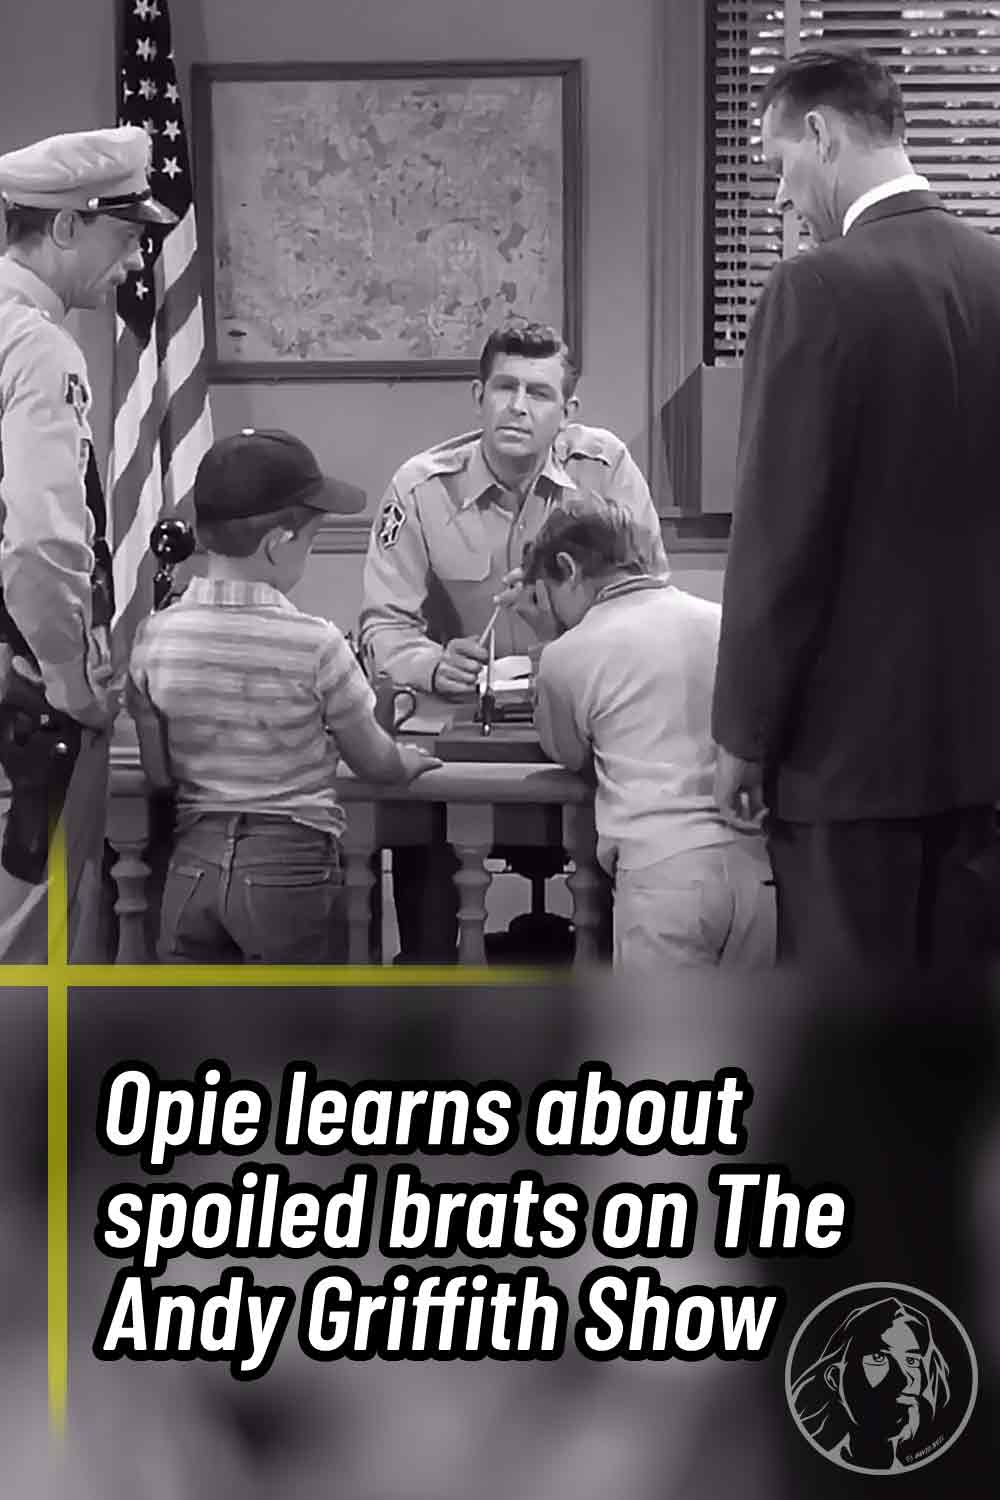 Opie learns about spoiled brats on The Andy Griffith Show